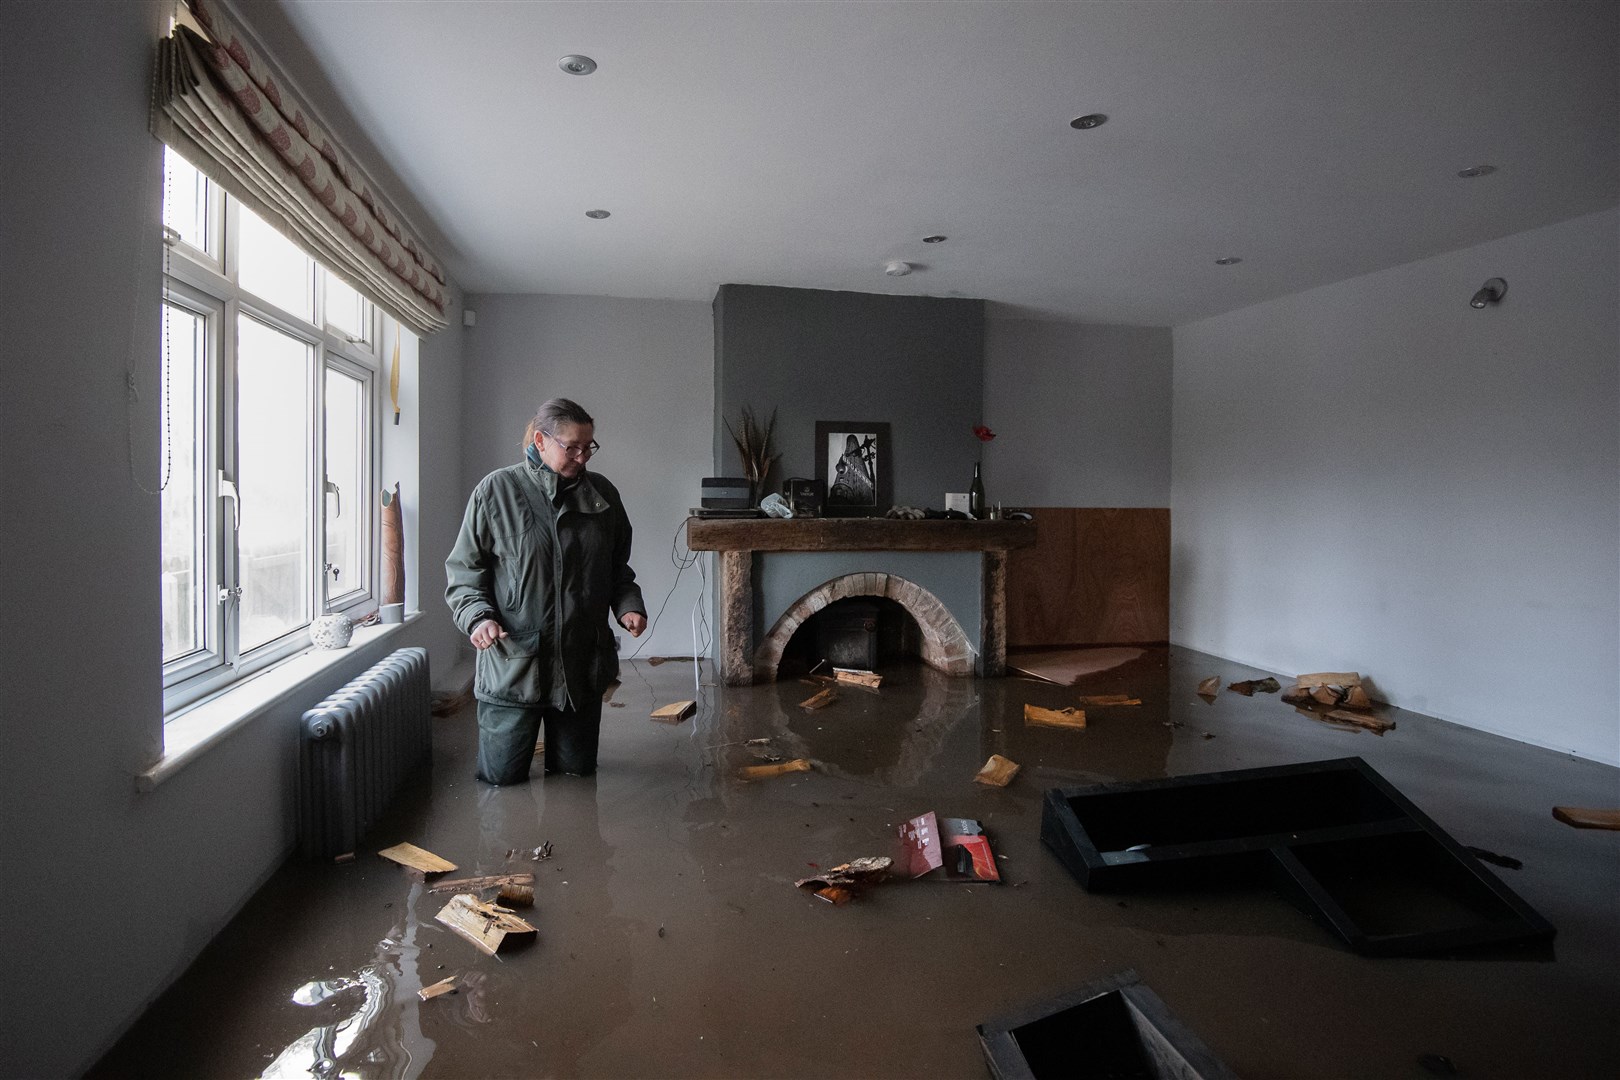 Residents of Lymm – and elsewhere – are counting the cost after flood waters entered their homes (Joe Giddens/PA)